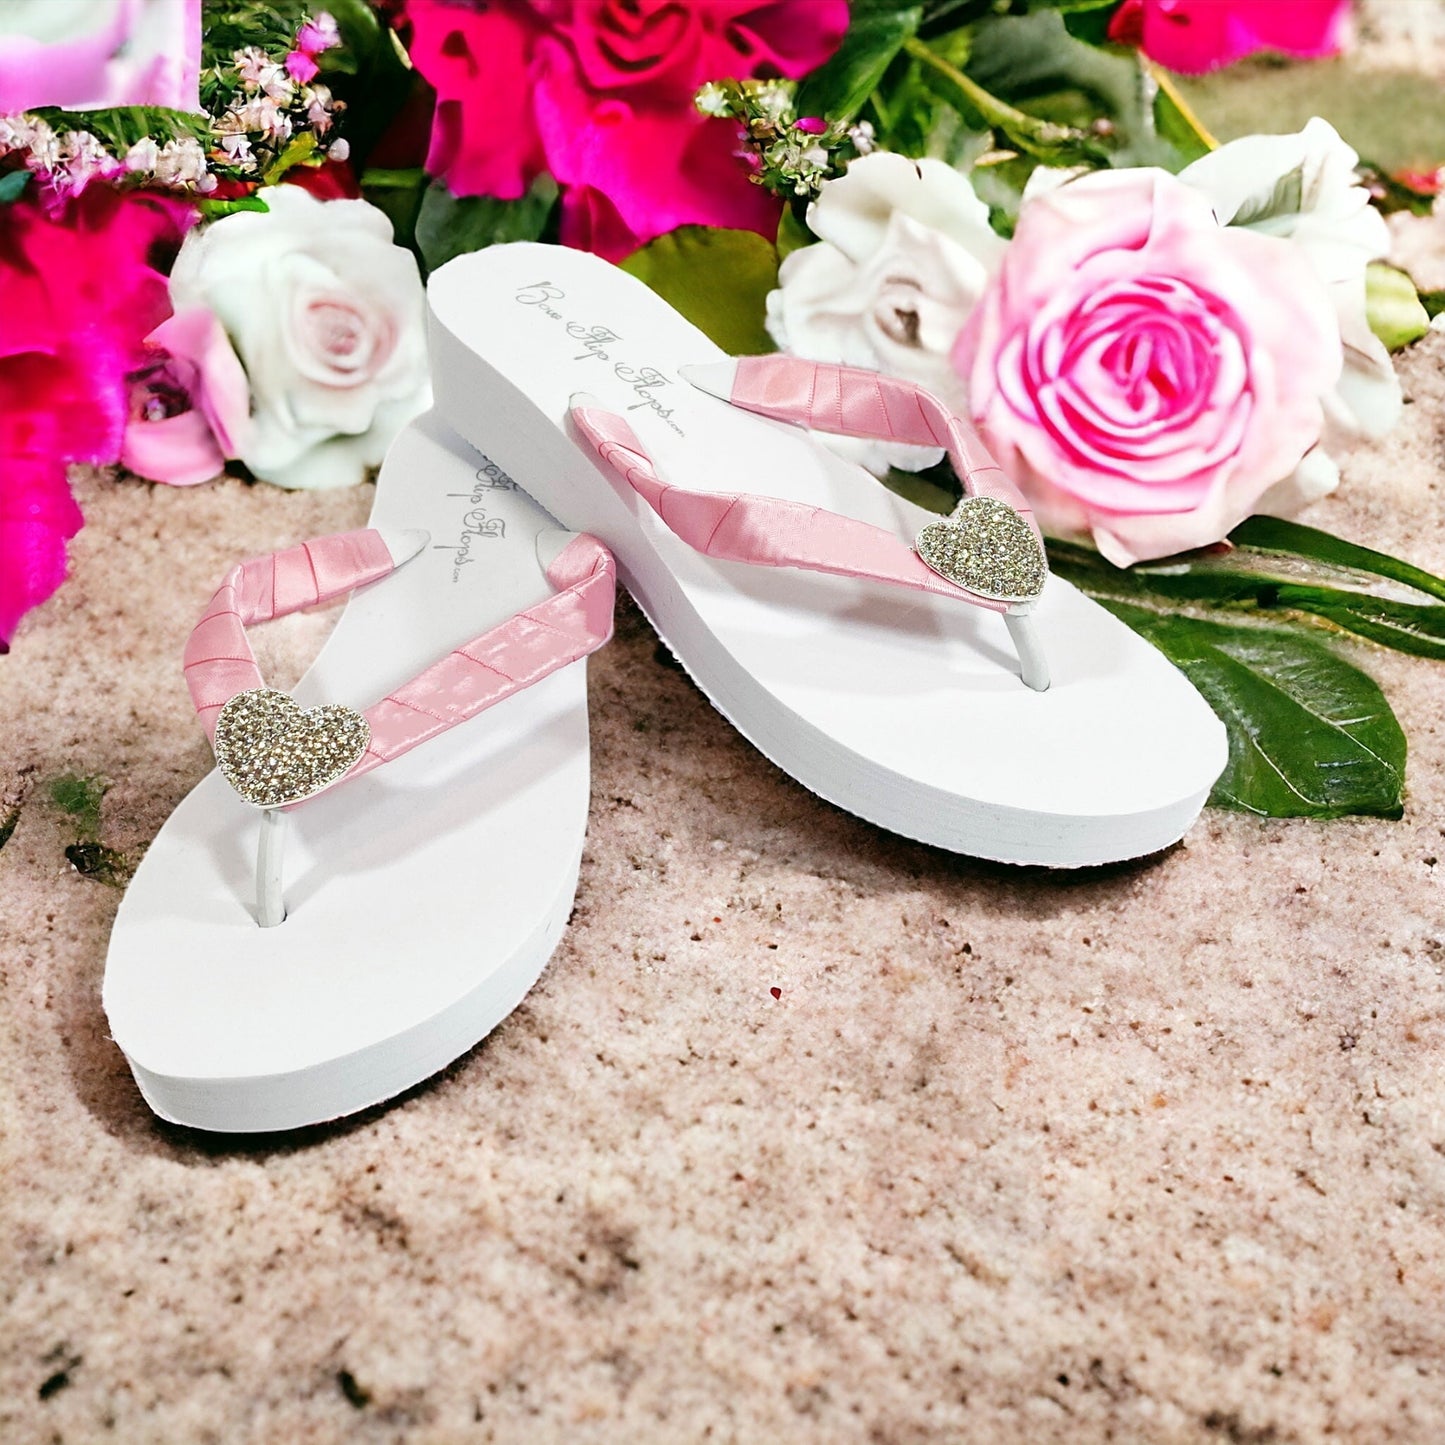 Silver & Ivory High 3.5 Inch Wedge Flip Flops - Customize